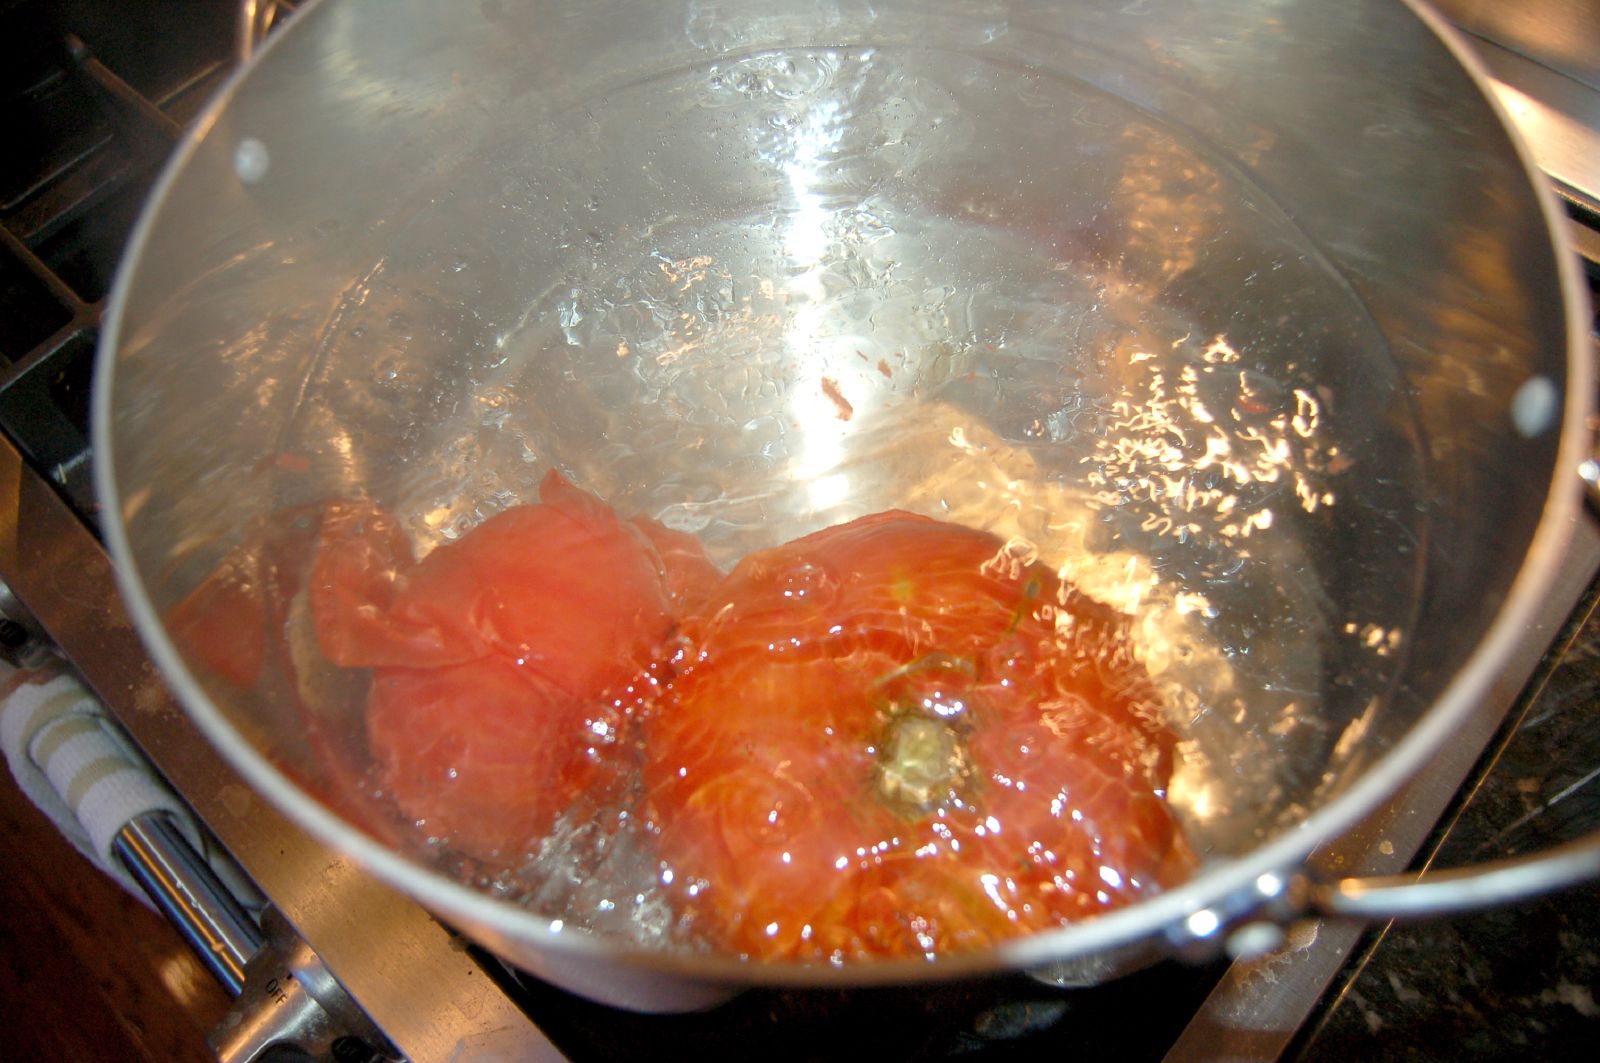 some tomatoes are in a metal bowl on the stove